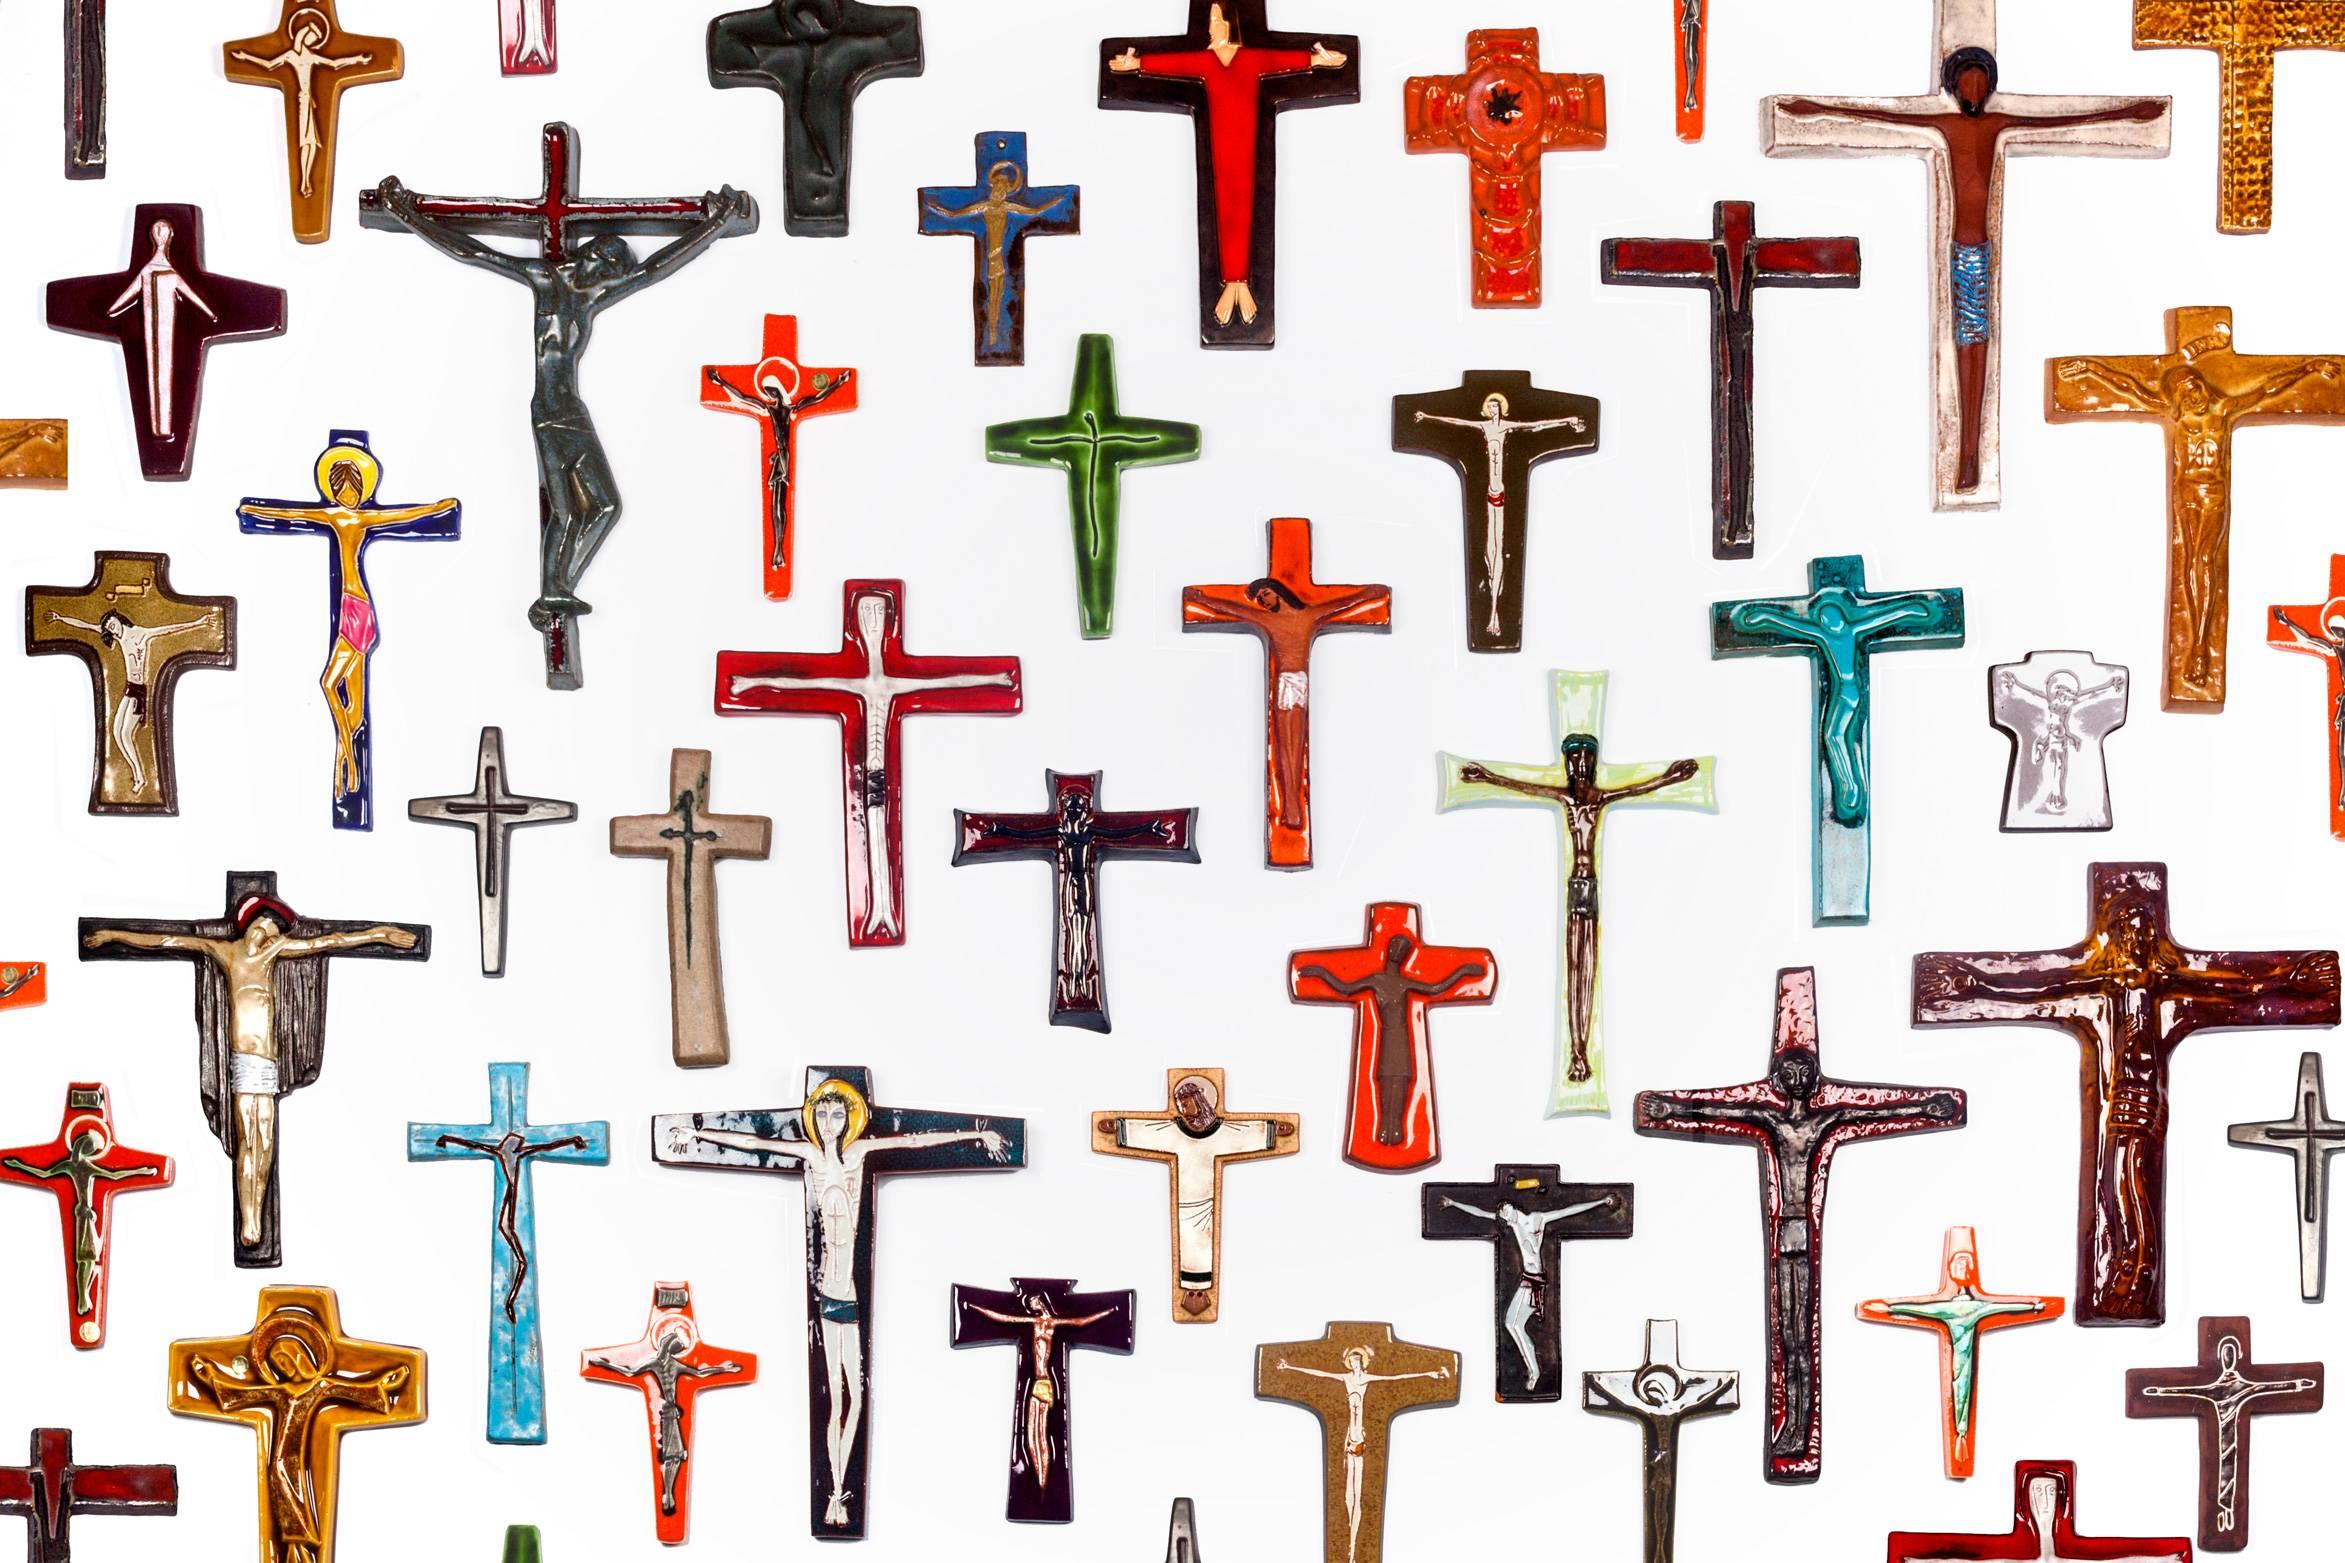 Ceramic wall cross, over six inches tall, handmade in Belgium in the 1970s. Hand-painted in red, and tones of brown, black and white. Finished in a high-gloss glaze. 

This piece is part of a 69-piece ceramic crucifix collection, all handmade in